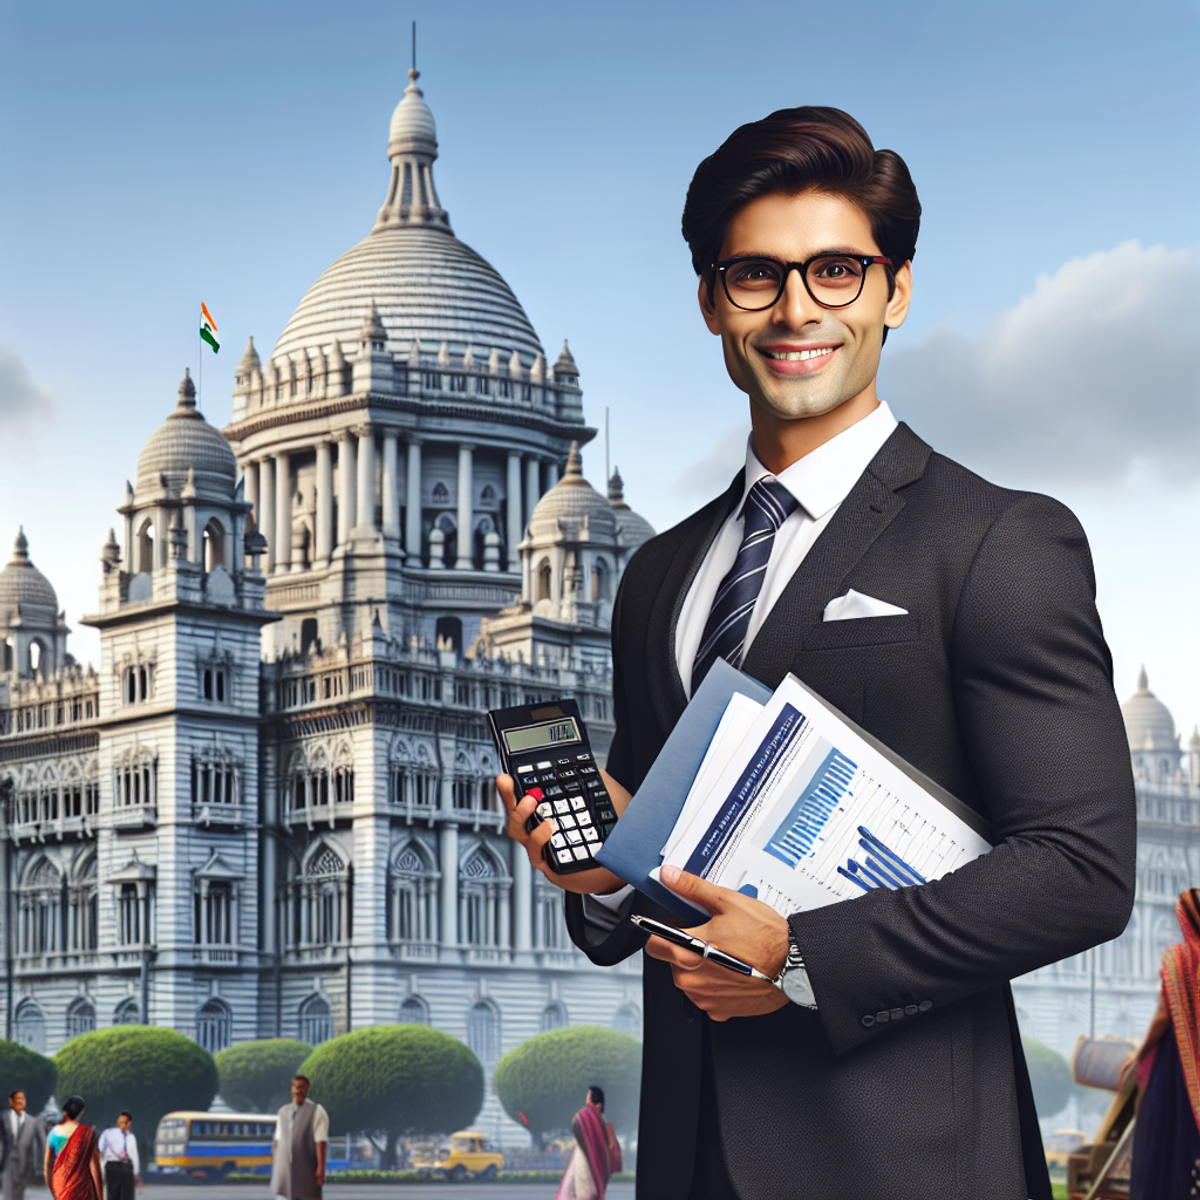 A South Asian professional financial advisor standing in front of the Victoria Memorial in Kolkata, holding financial documents in one hand and a calculator in the other, exuding confidence and trustworthiness with a warm smile.